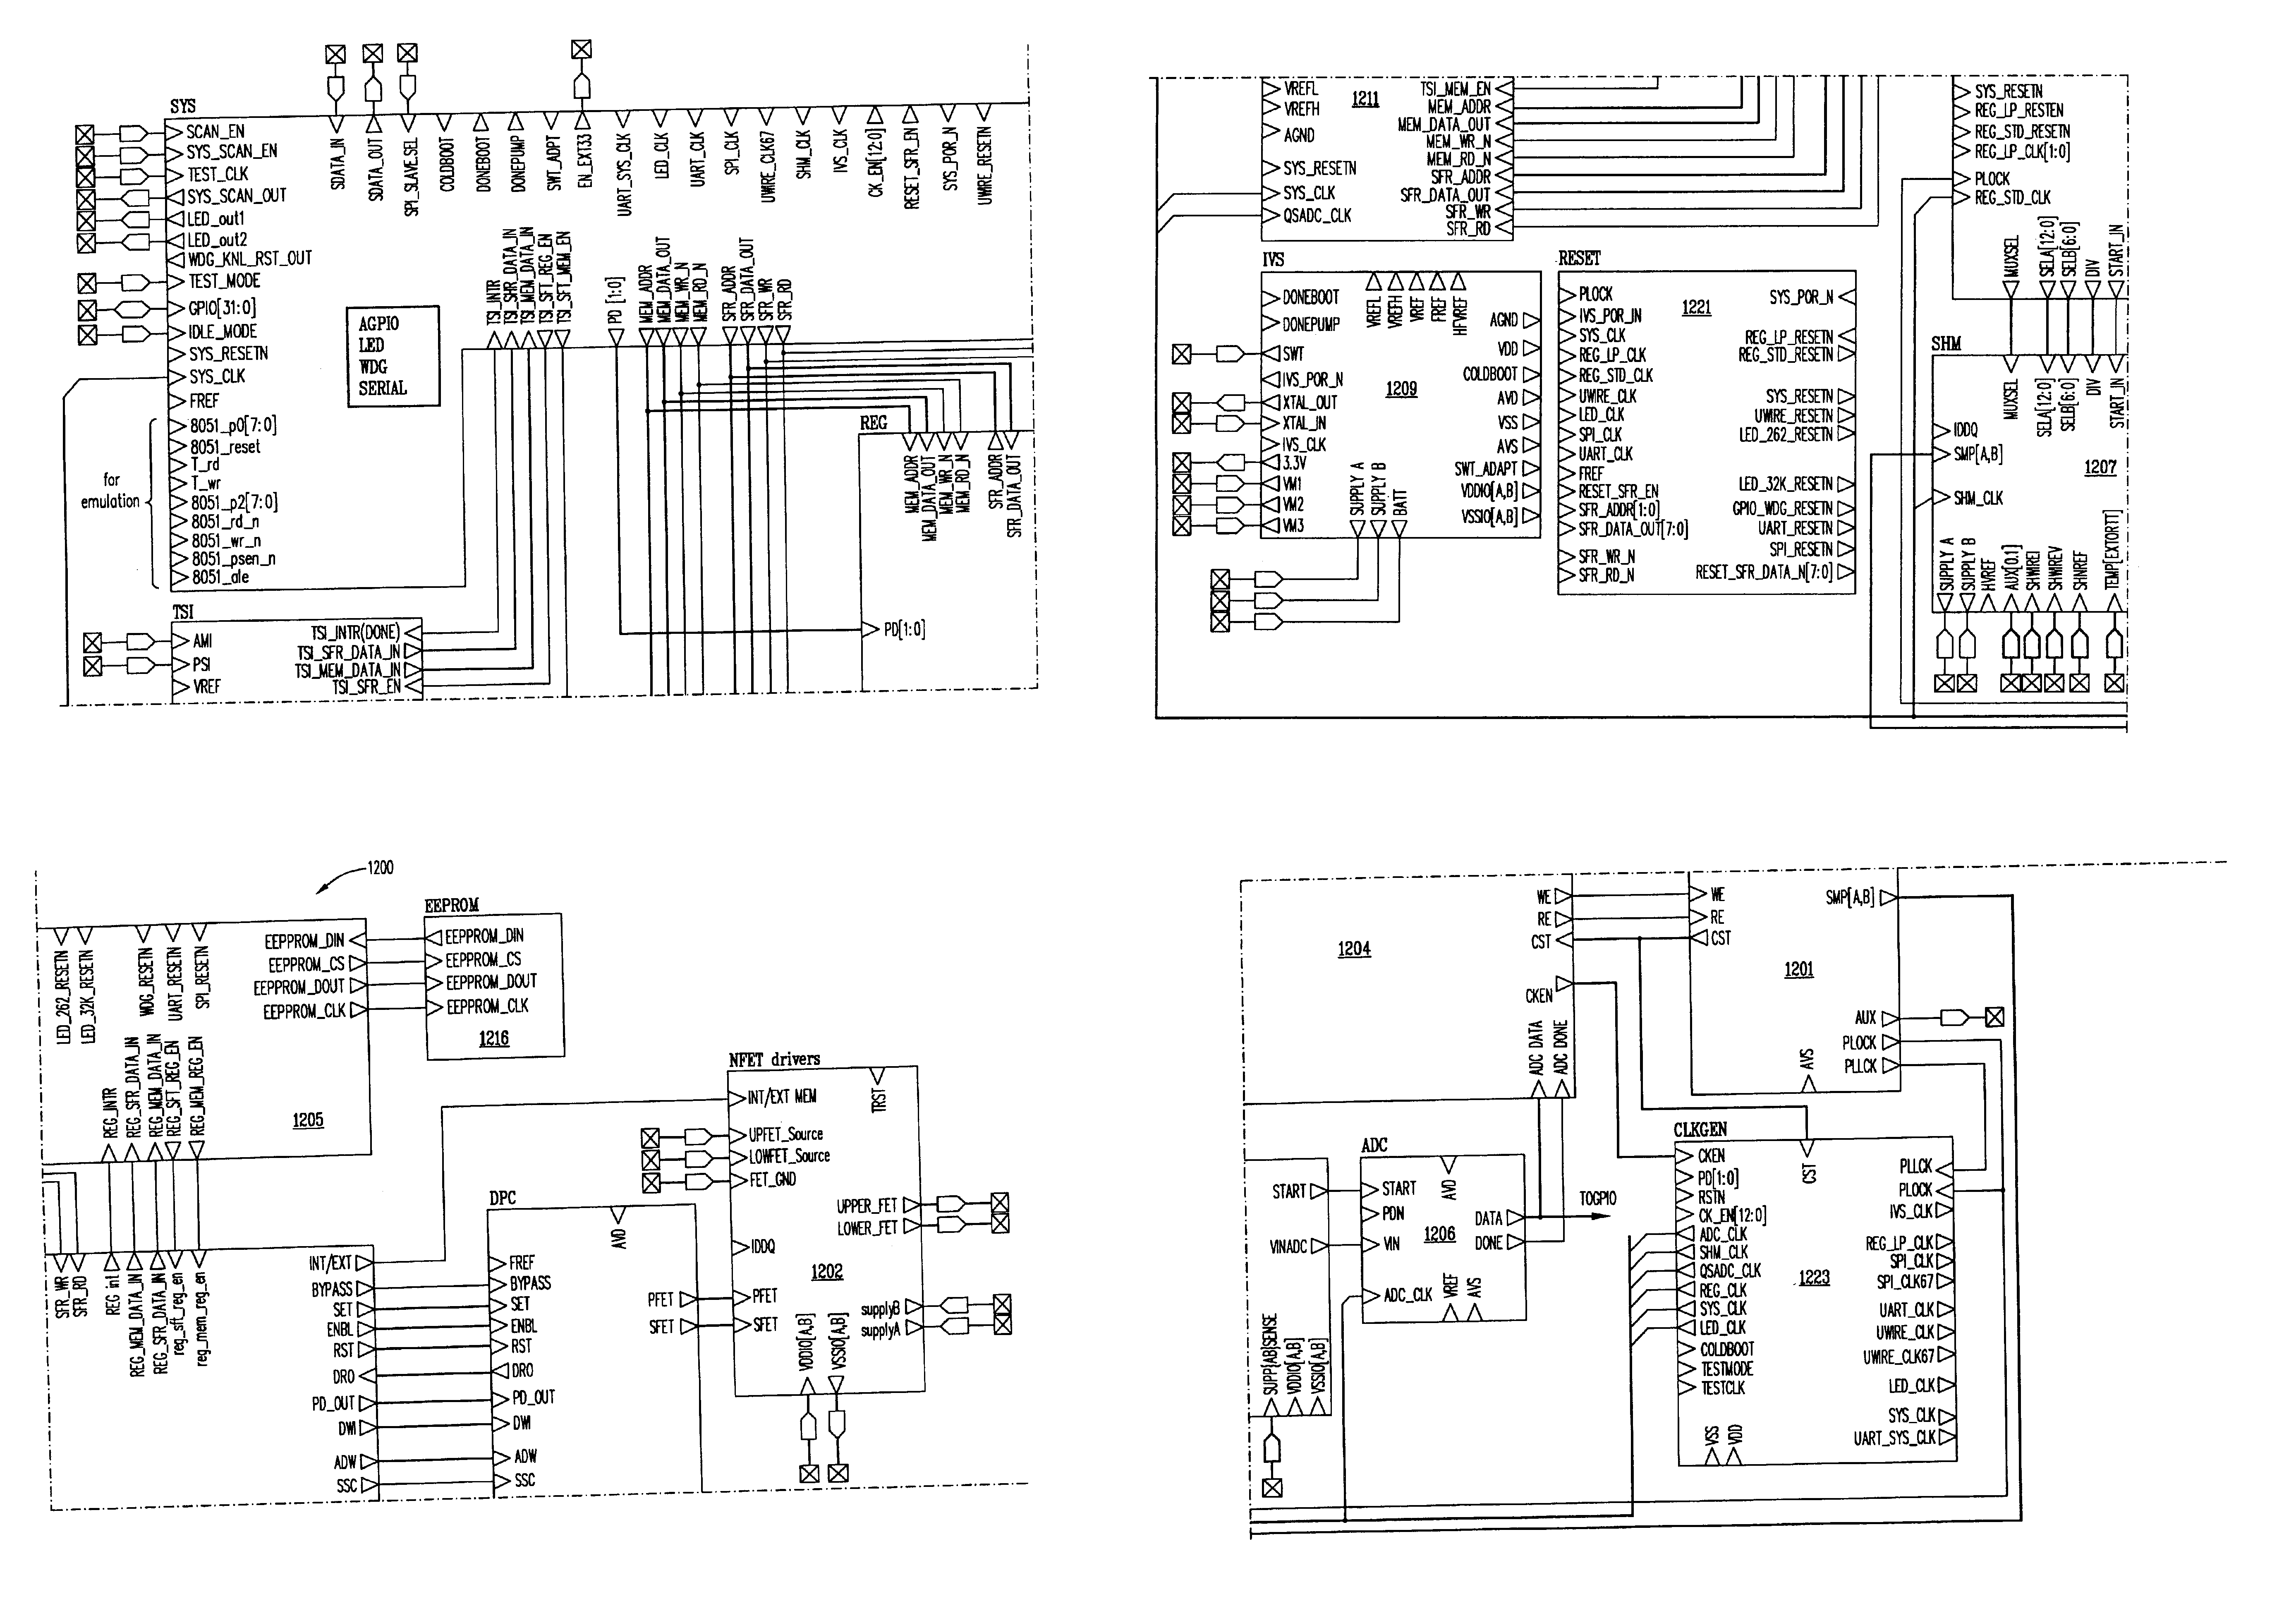 Switching power converter controller with watchdog timer